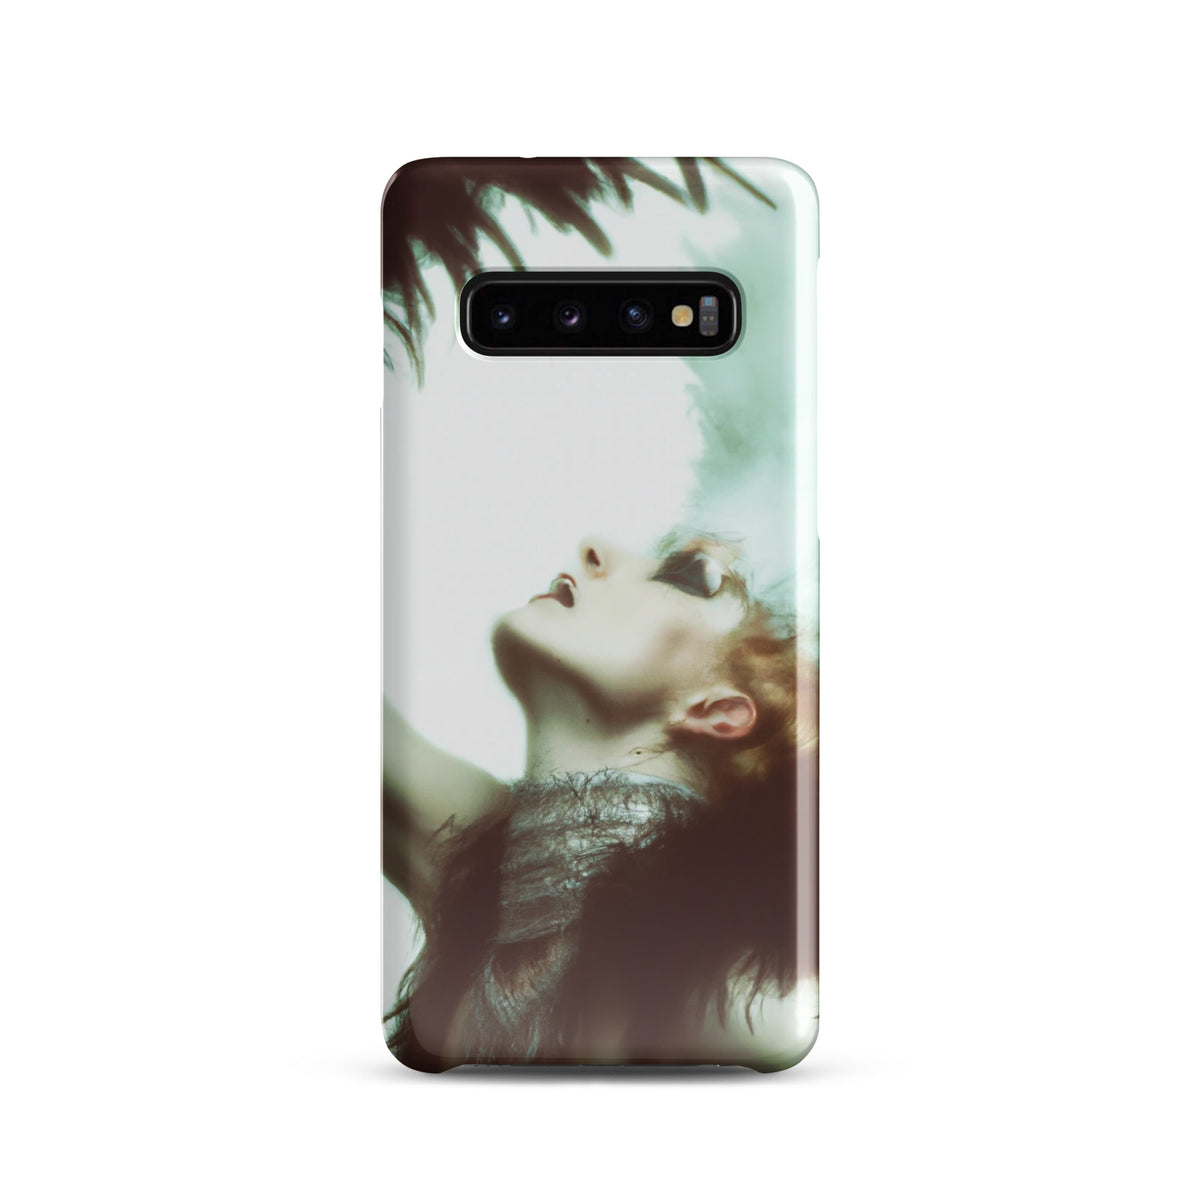  Samsung Phone case with a Follies Bergere dancer with lots of plumage